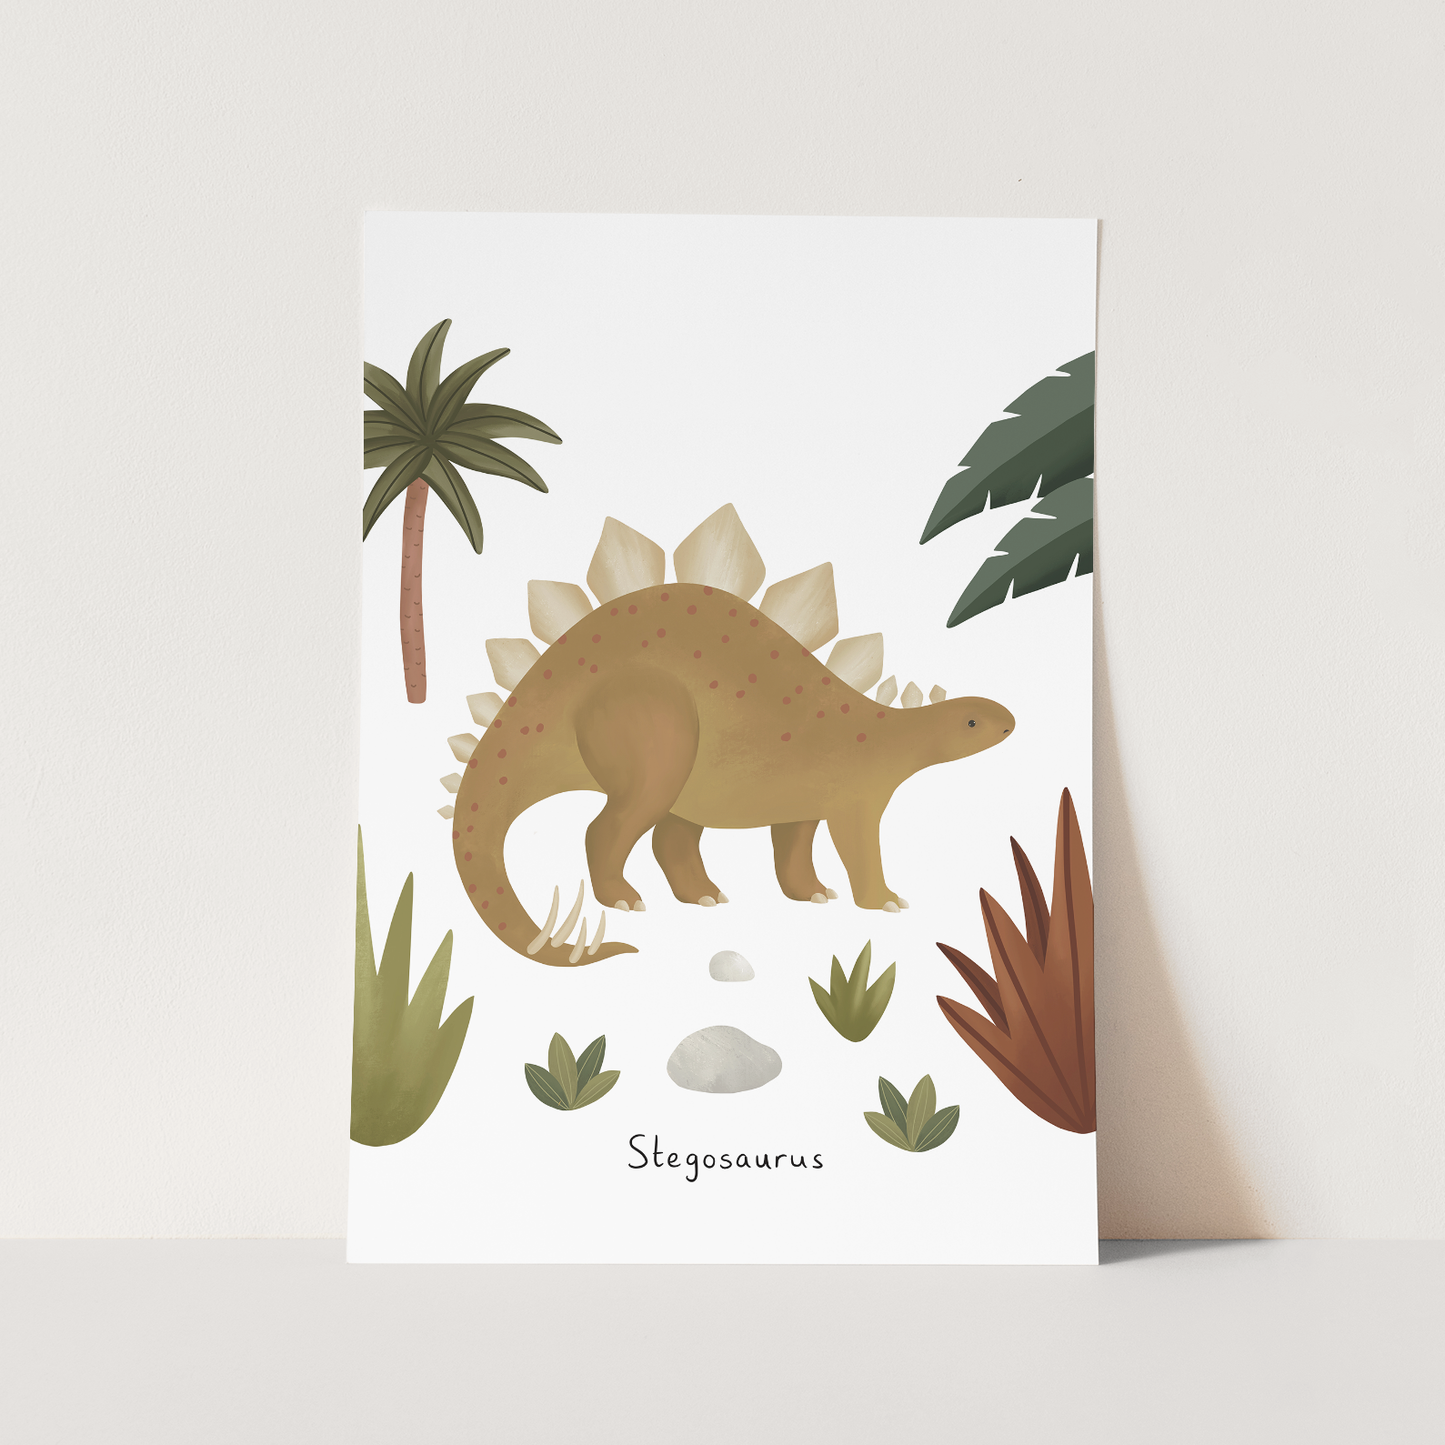 Stegosaurus Art Print by Kid of the Village (6 Sizes Available)